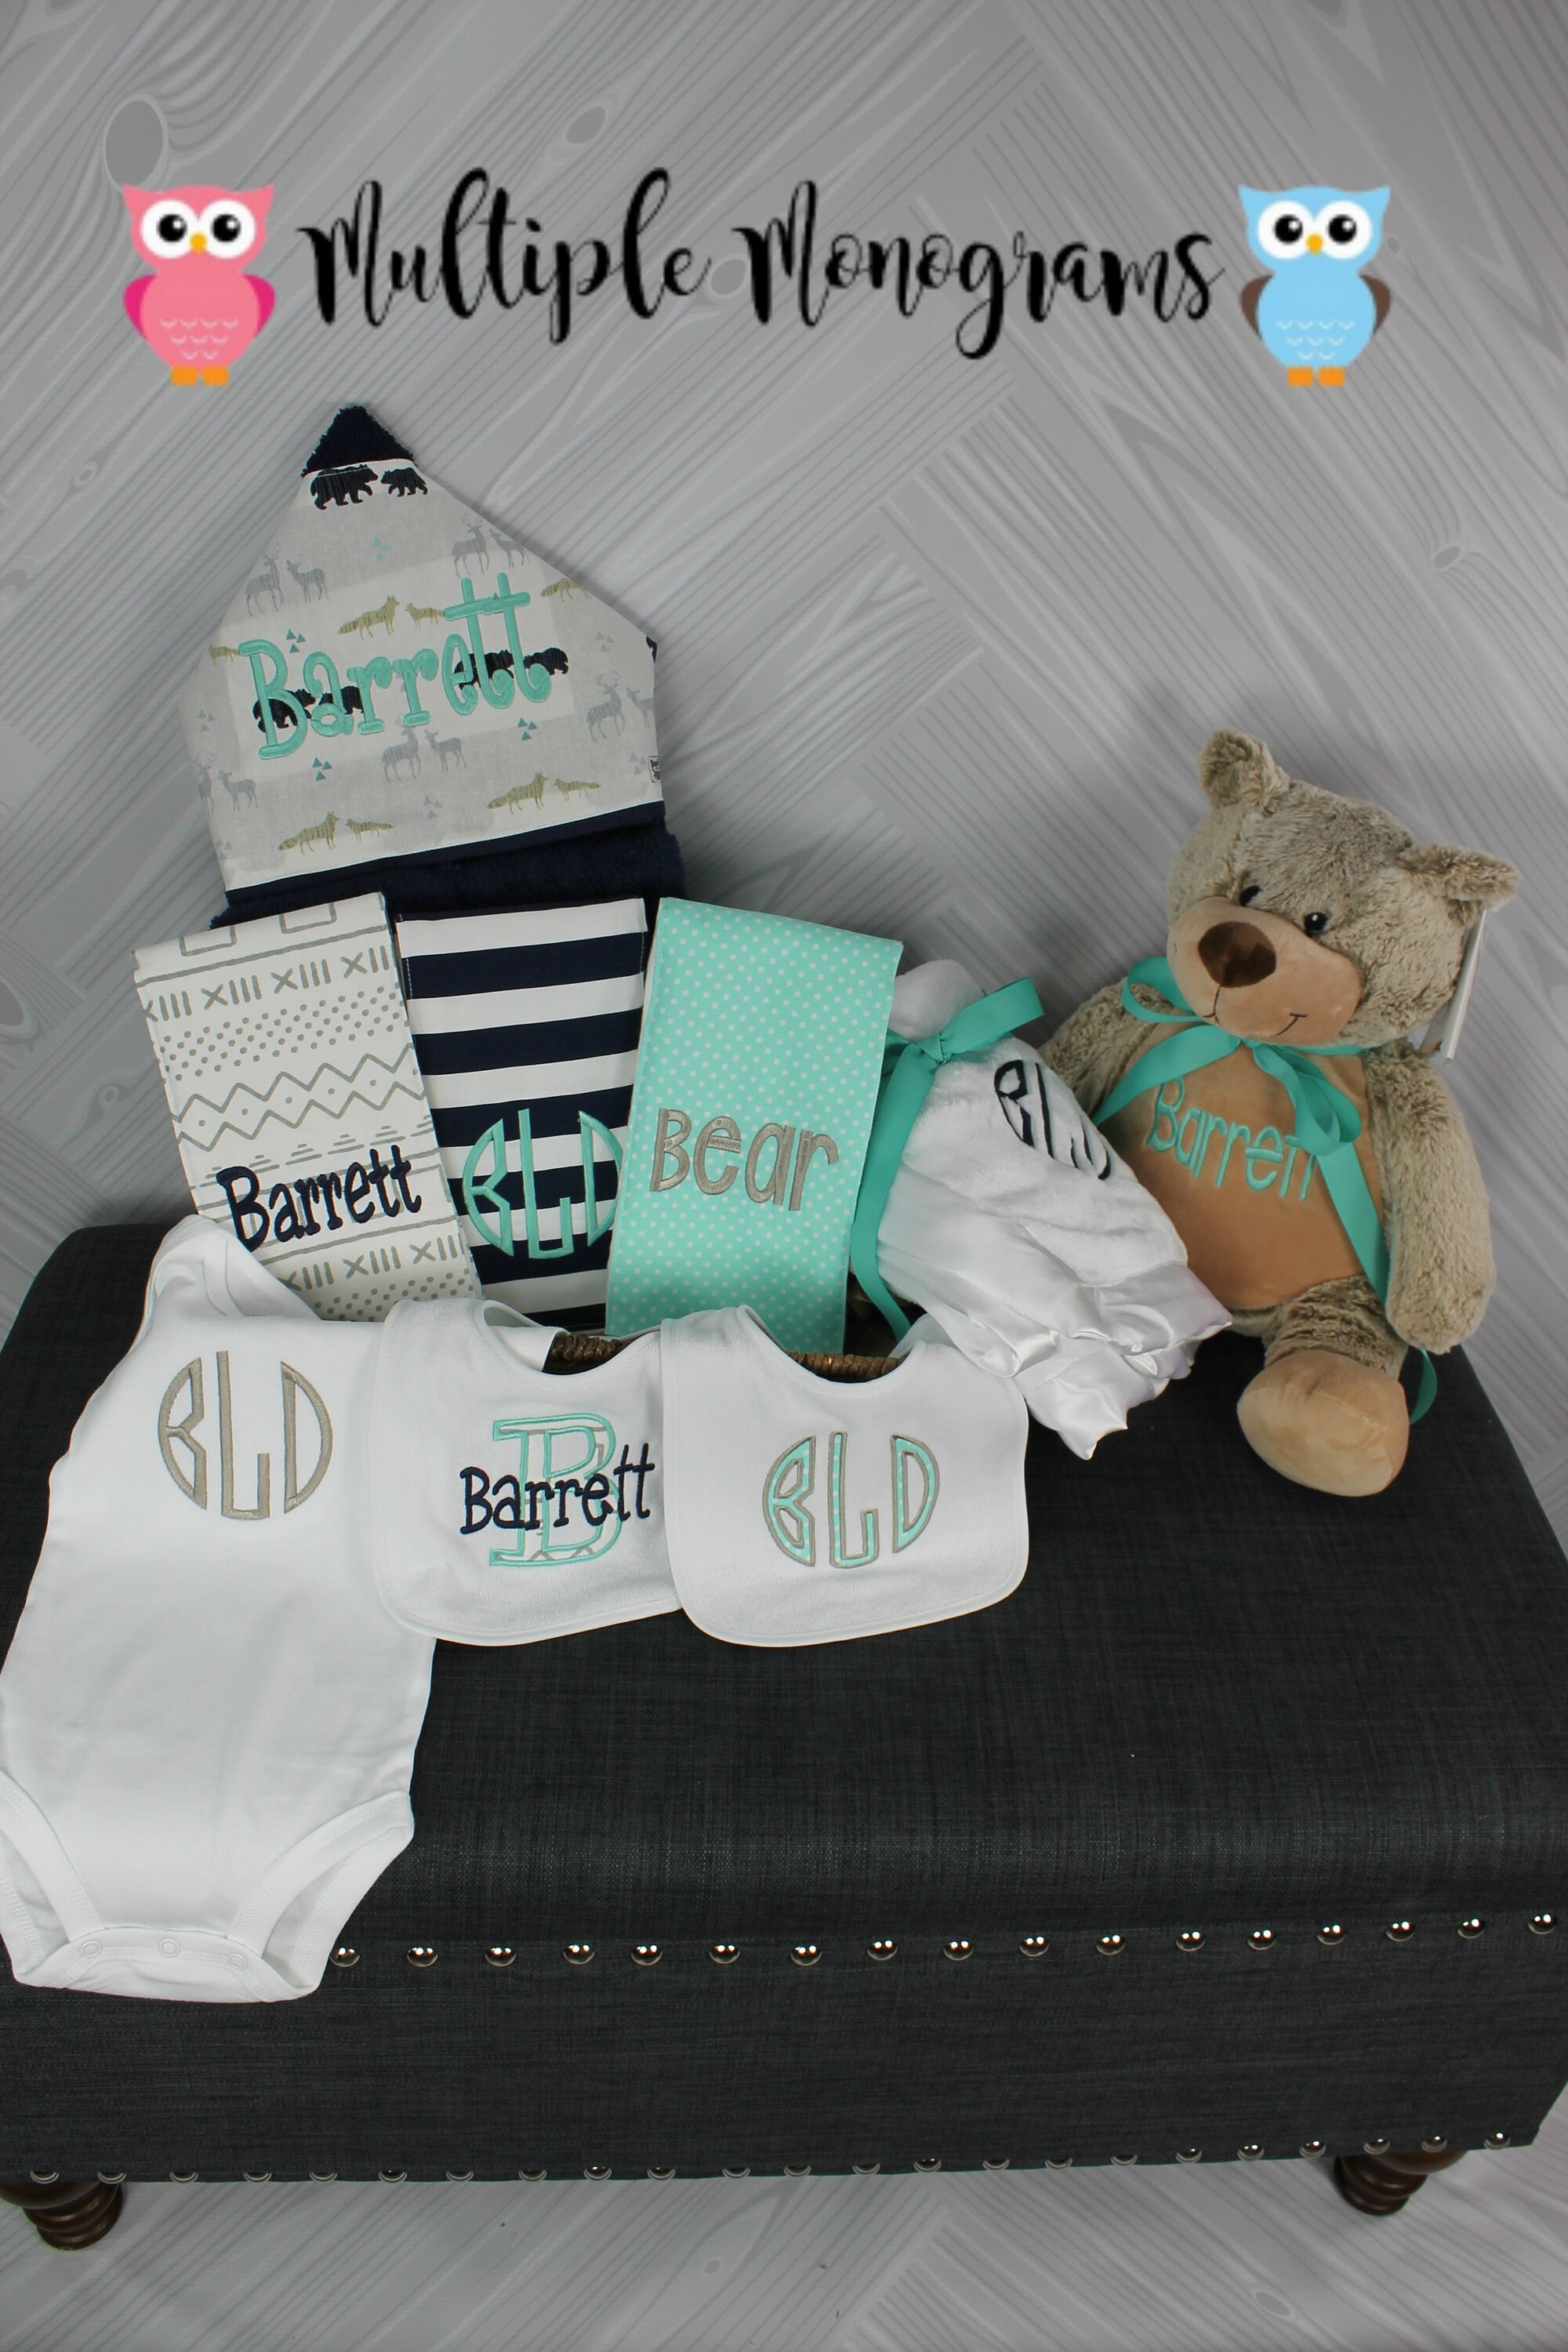 personalized baby shower gift baskets